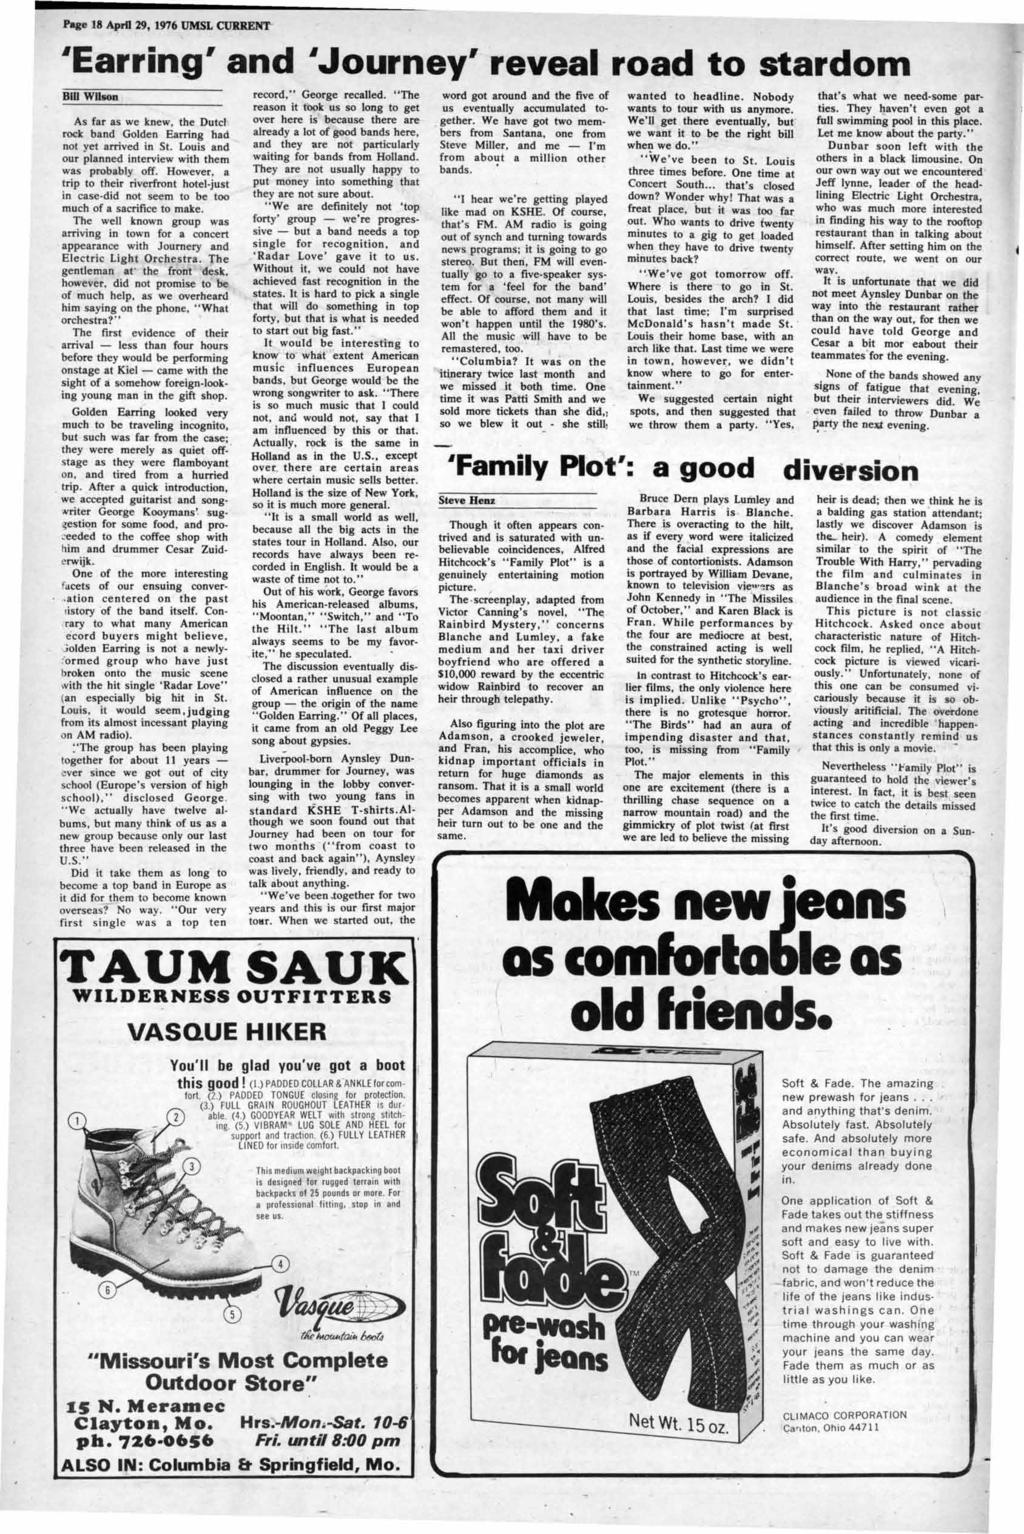 Page 18 April 29, 1976 UMSL CURRENT IEarring' and I Journey' reveal road to stardom Bm WUSOB As far as we knew, the Dutcl rock band Golden Earring had not yet a.rrived in St.